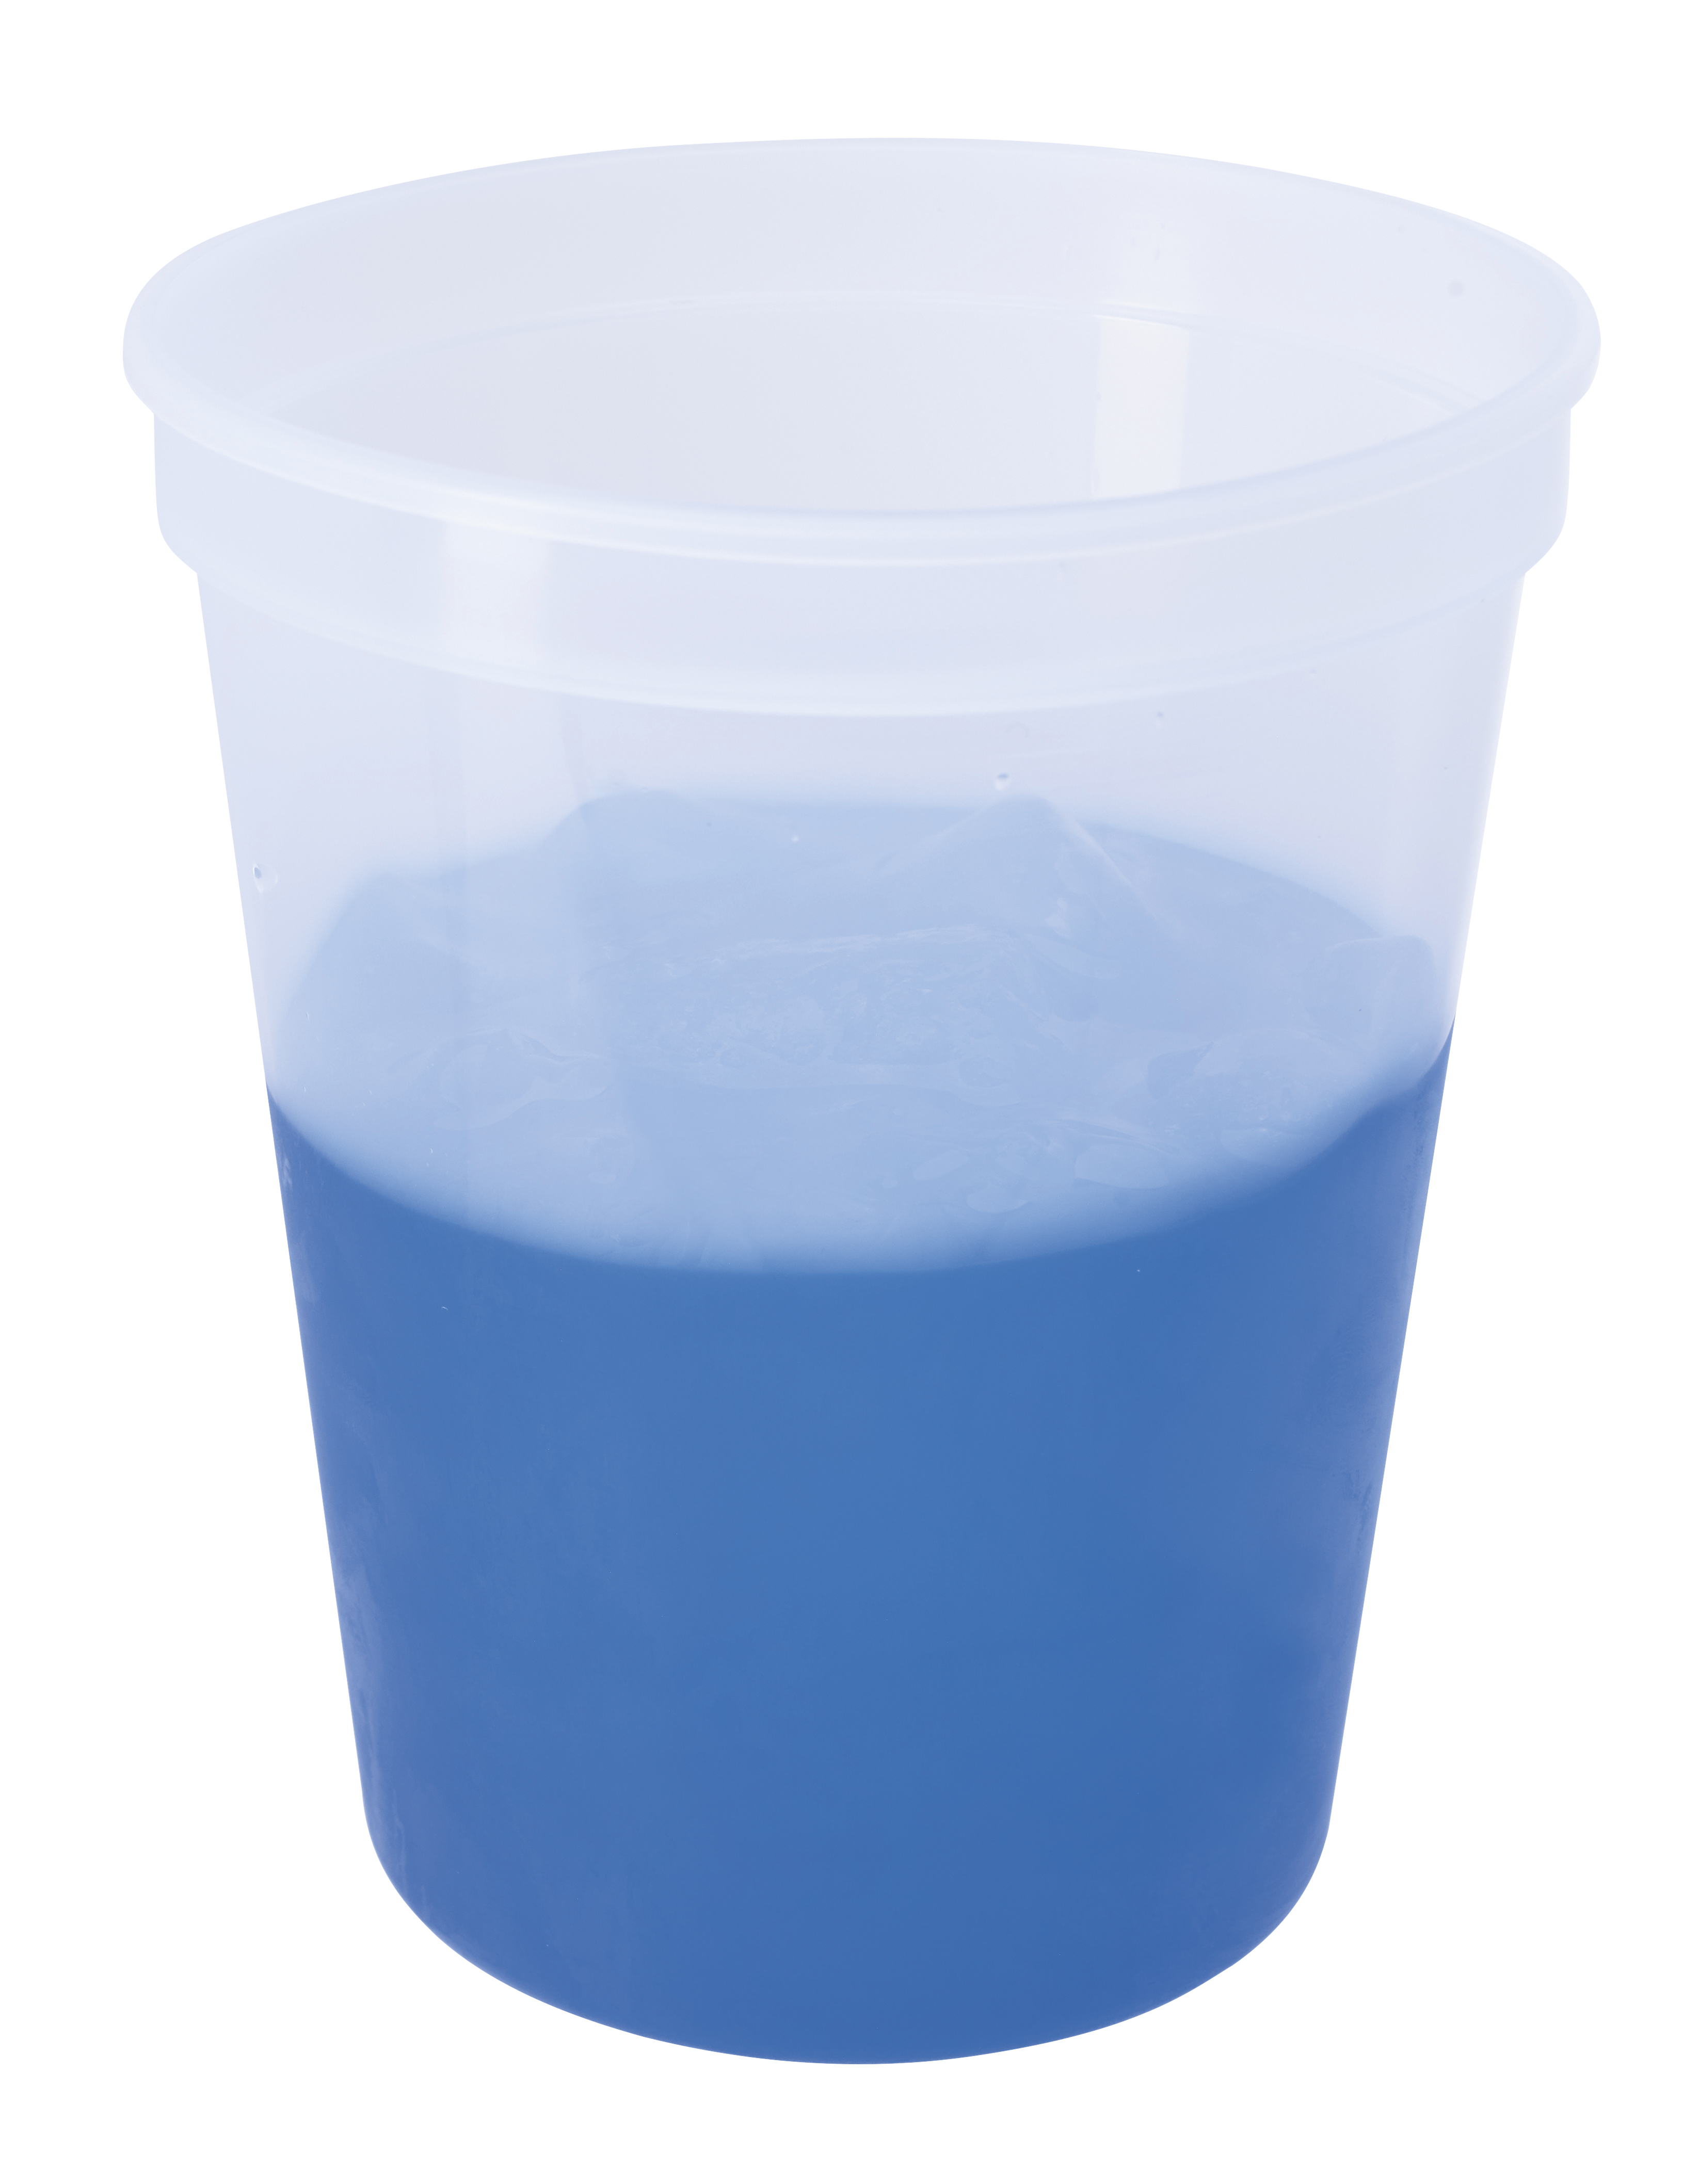 Good Value 46076 - Color Changing Stadium Cup - 16 oz